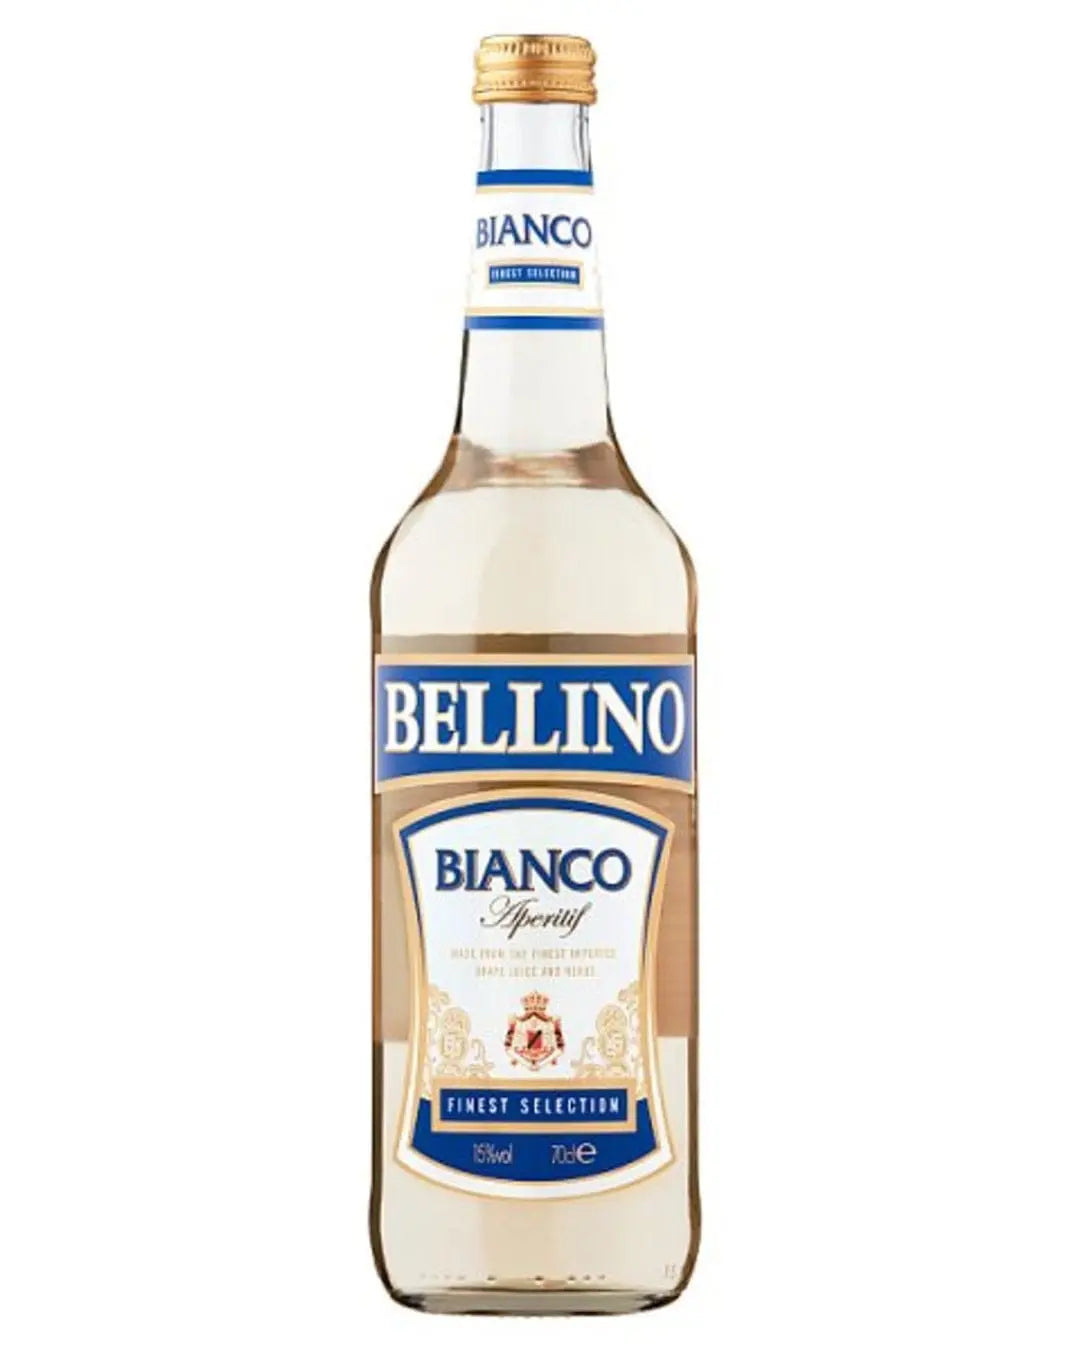 Bellino Bianco, 75 cl Fortified & Other Wines